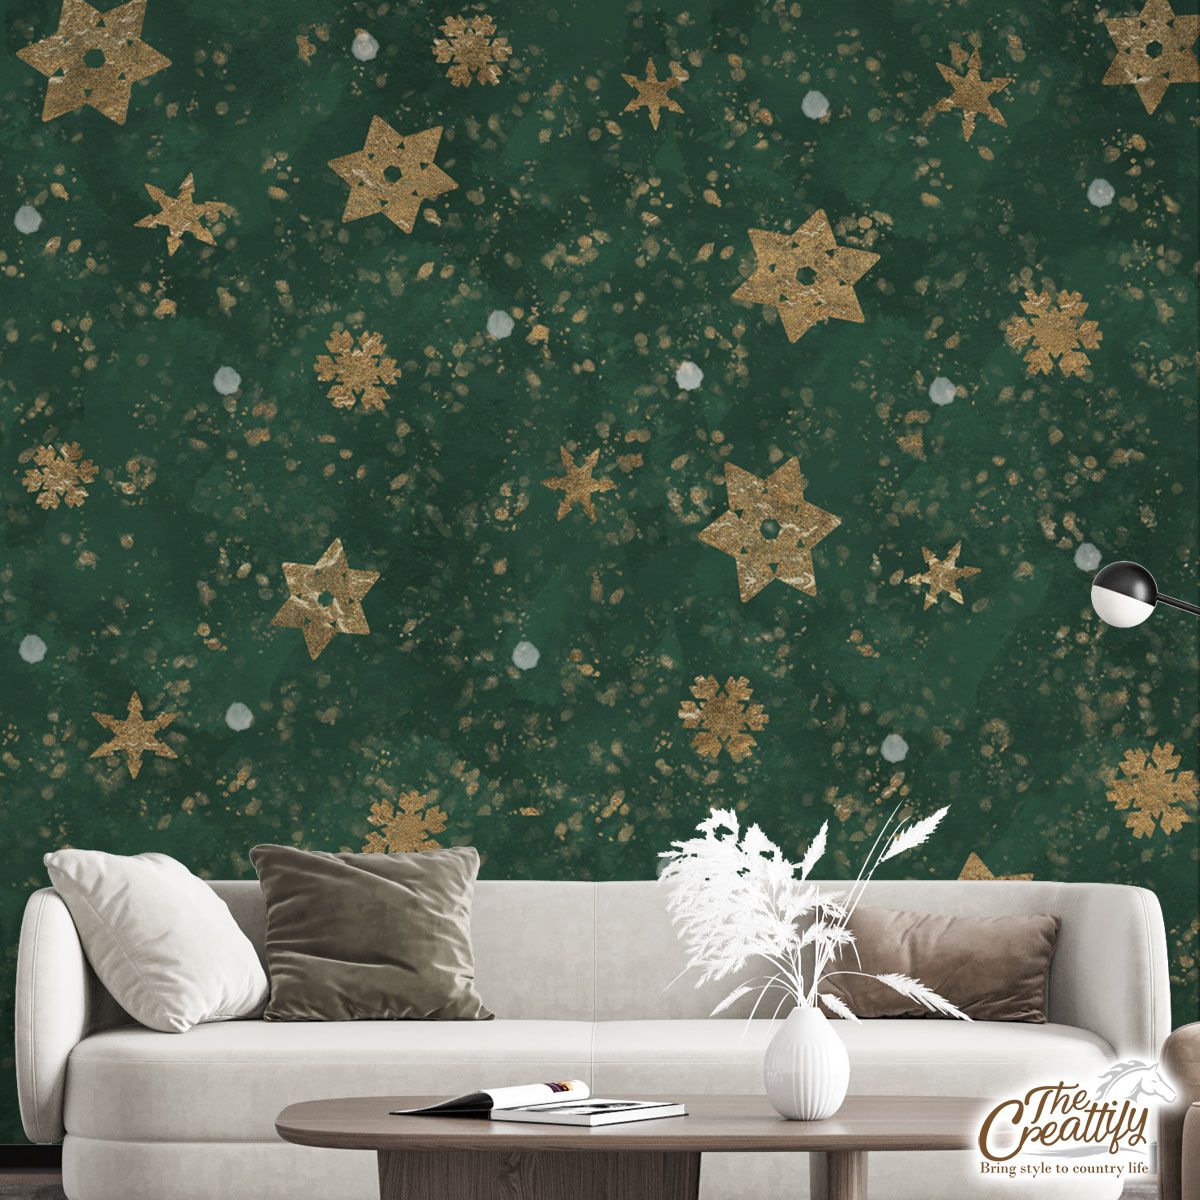 Gold Snowflake On Vintage Green Background Wall Mural